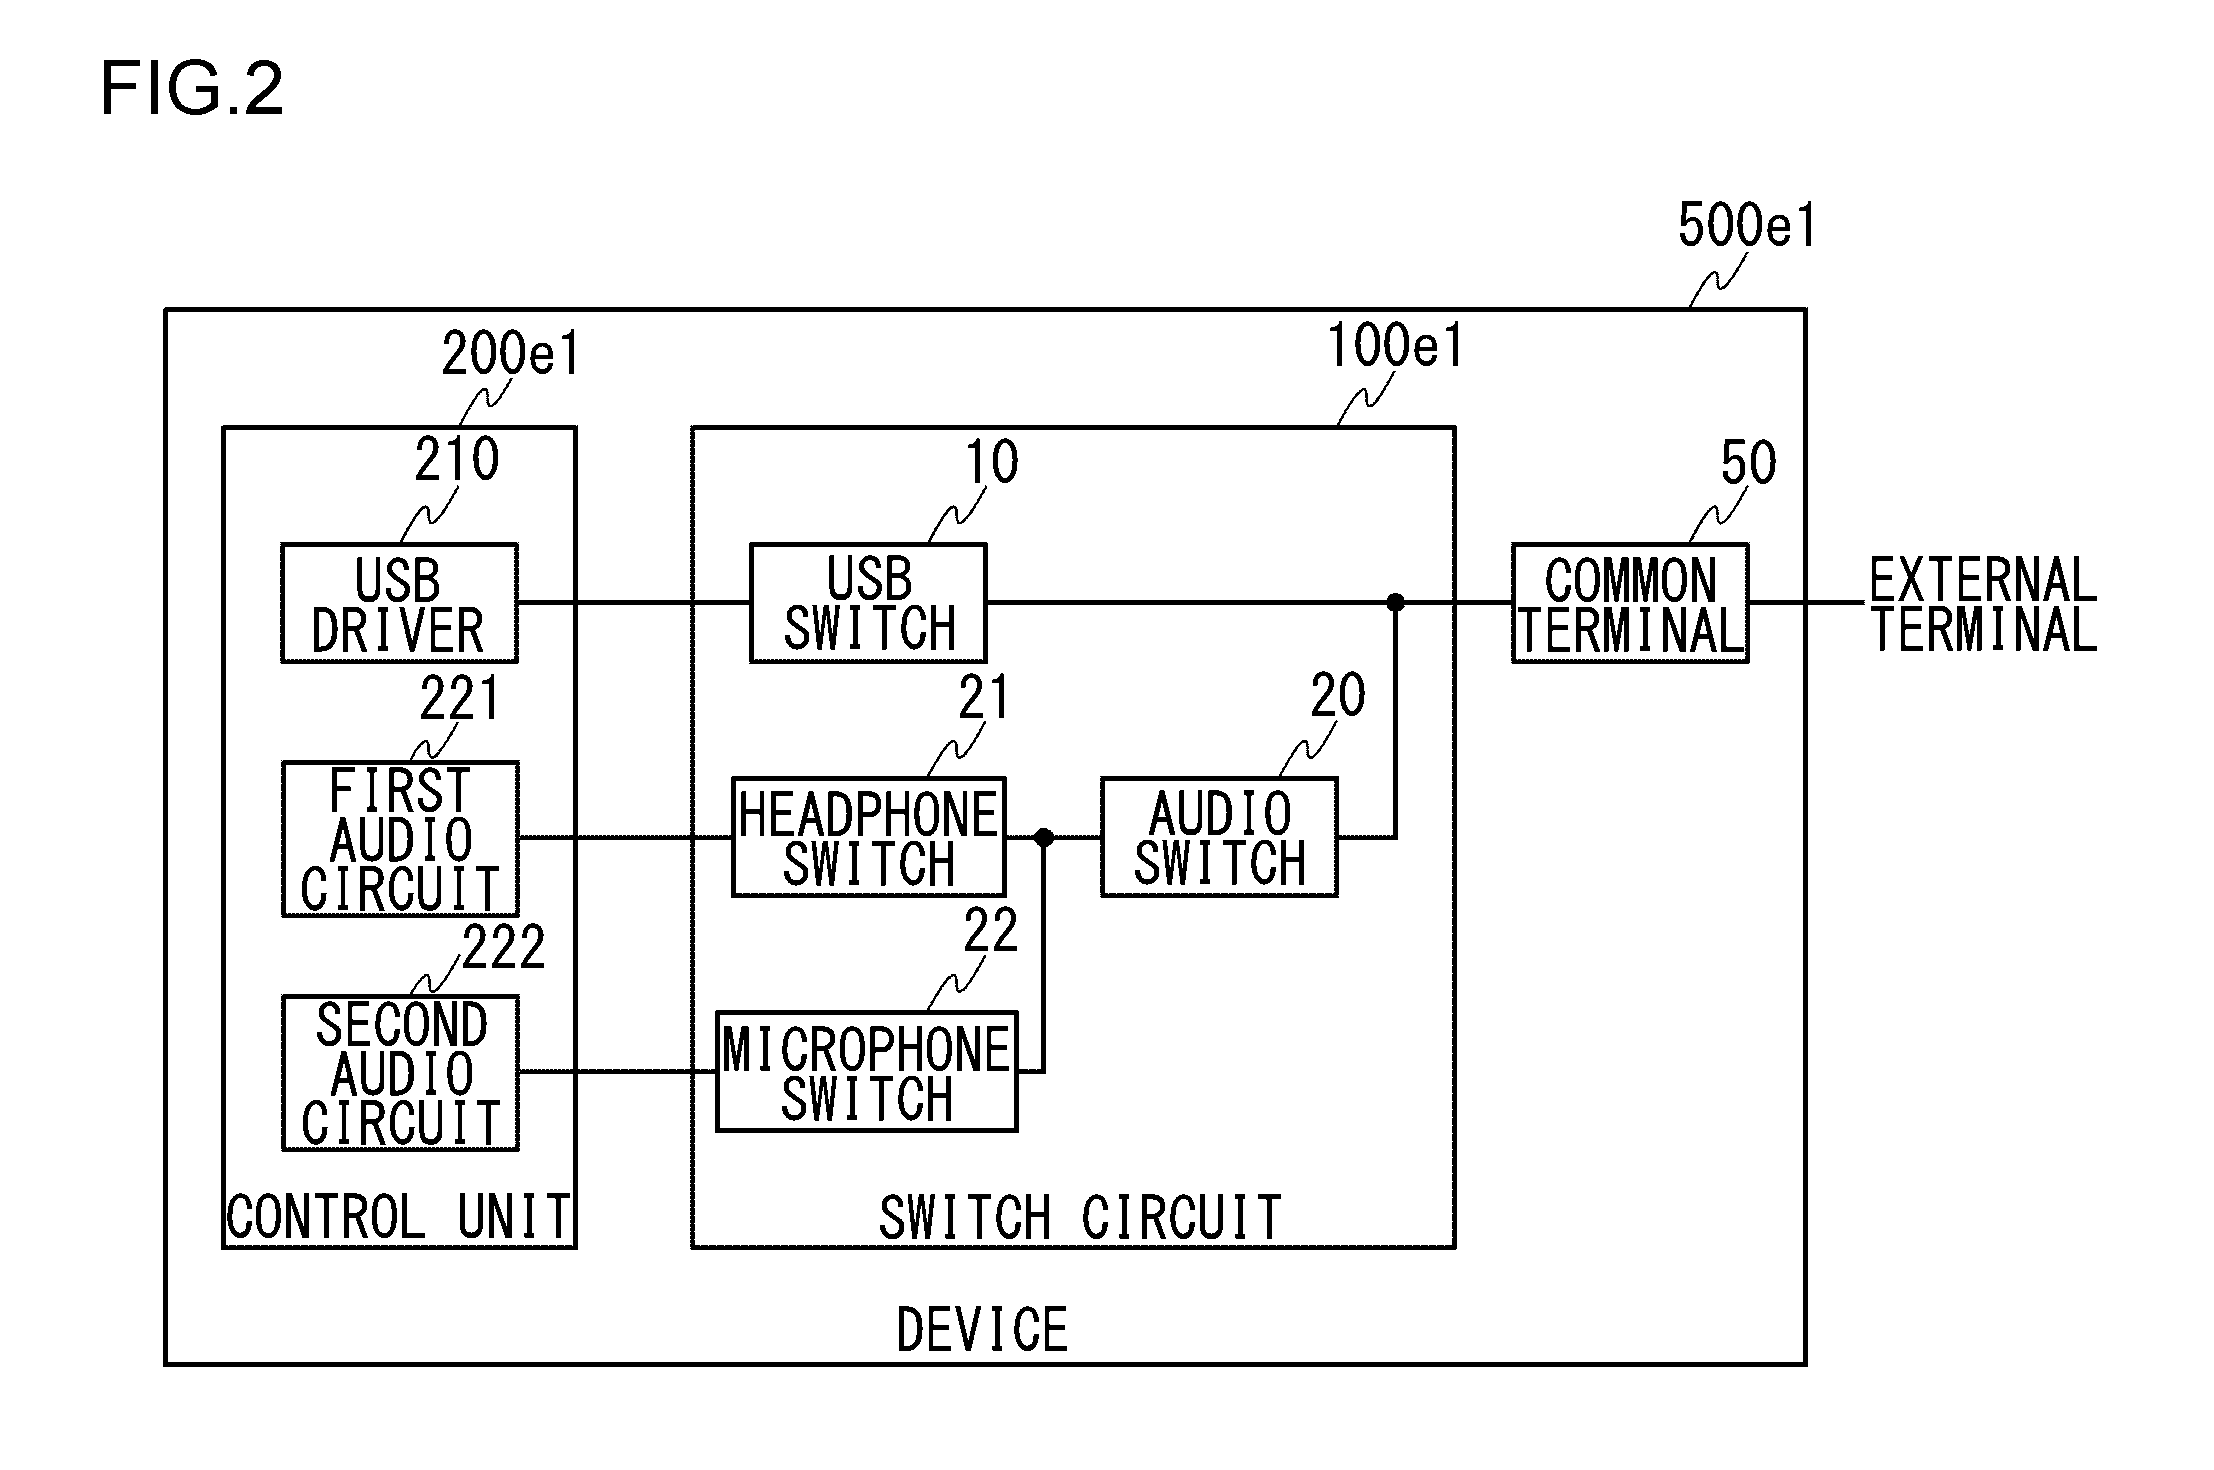 Switch and switch circuit using the same